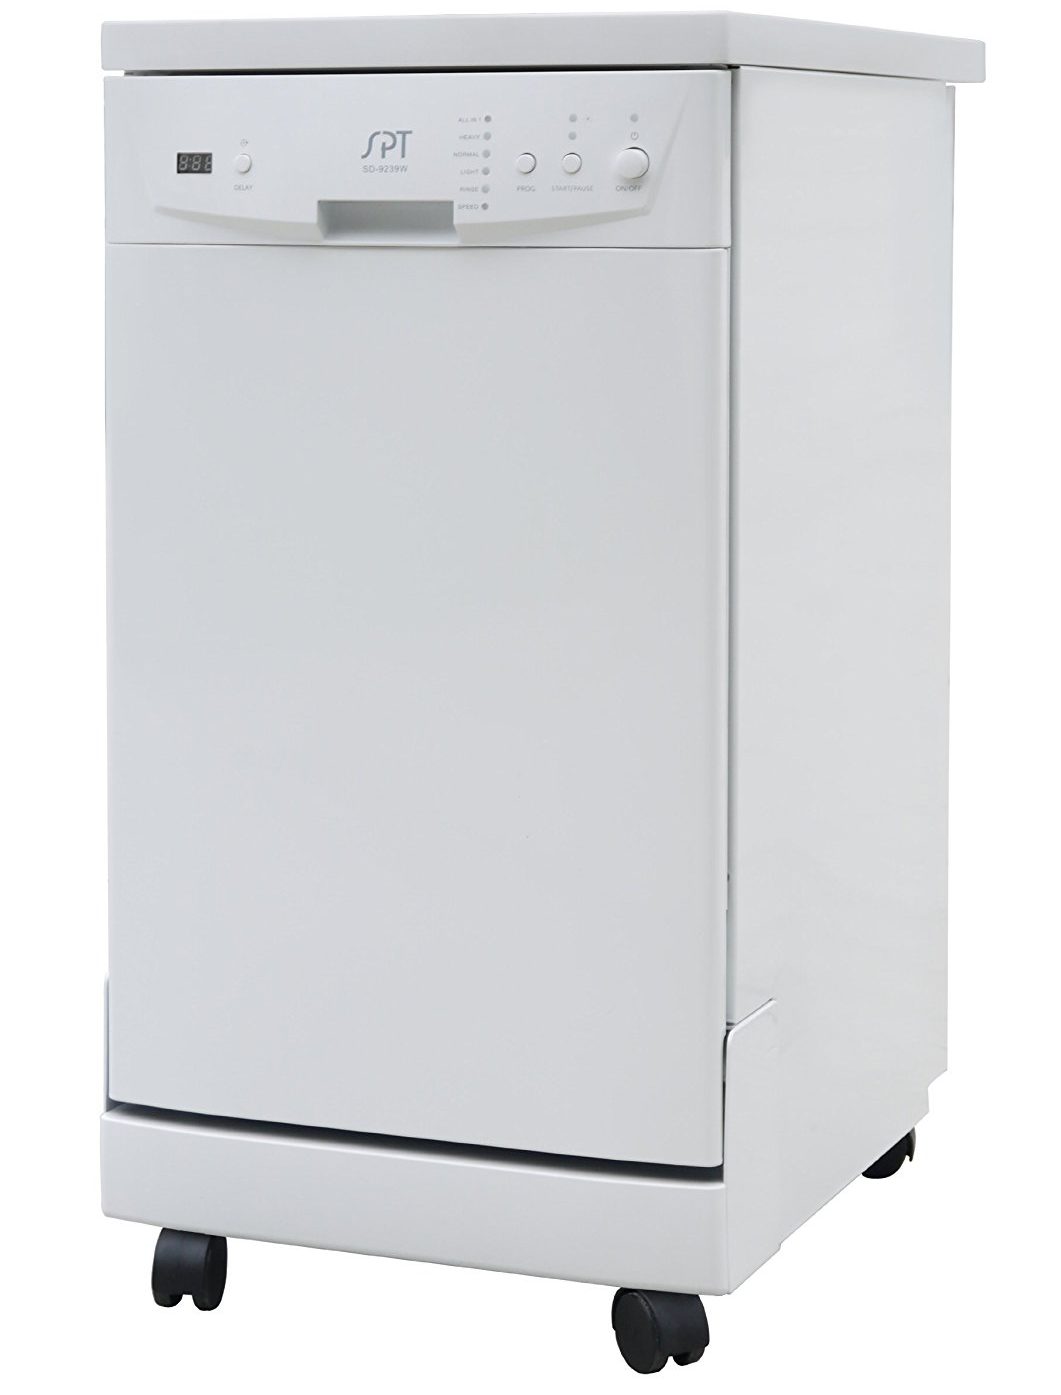 Best Portable Dishwasher 2018: SPT SD 9241 in White on Wheels Review